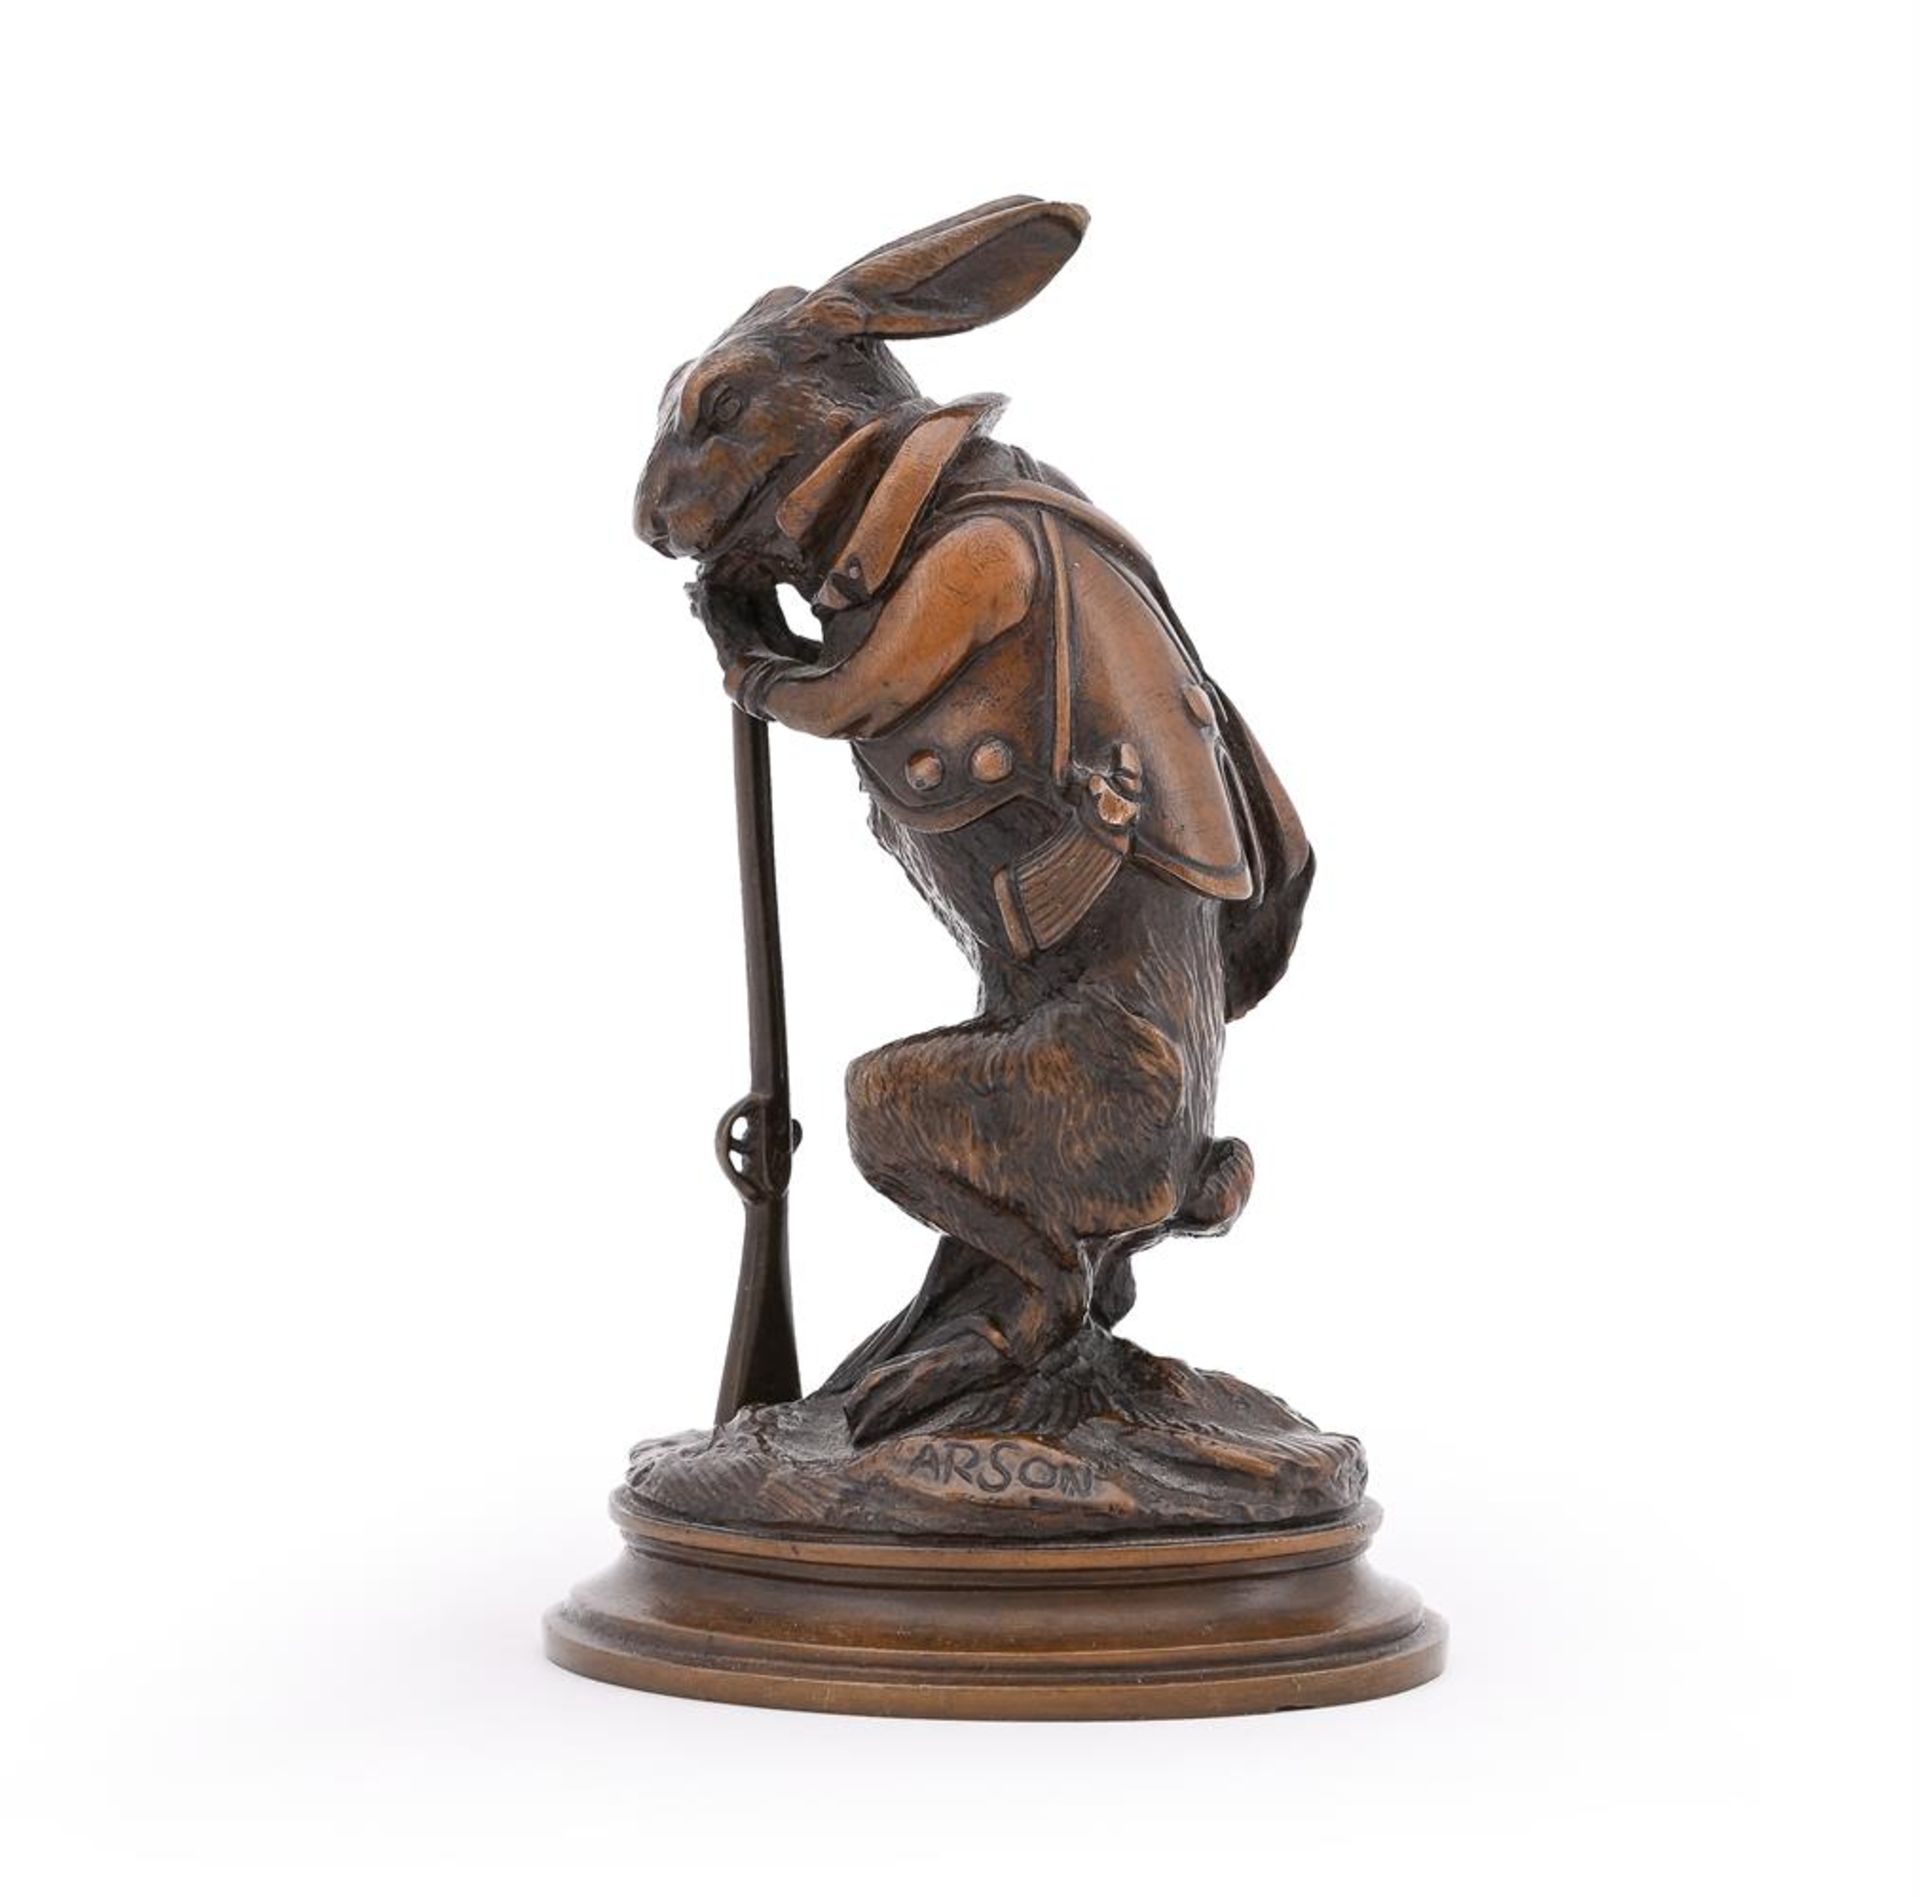 ALPHONSE-ALEXANDRE ARSON (FRENCH, 1822-1895), A BRONZE MODEL OF A HARE DRESSED AS A HUNTER - Image 3 of 5